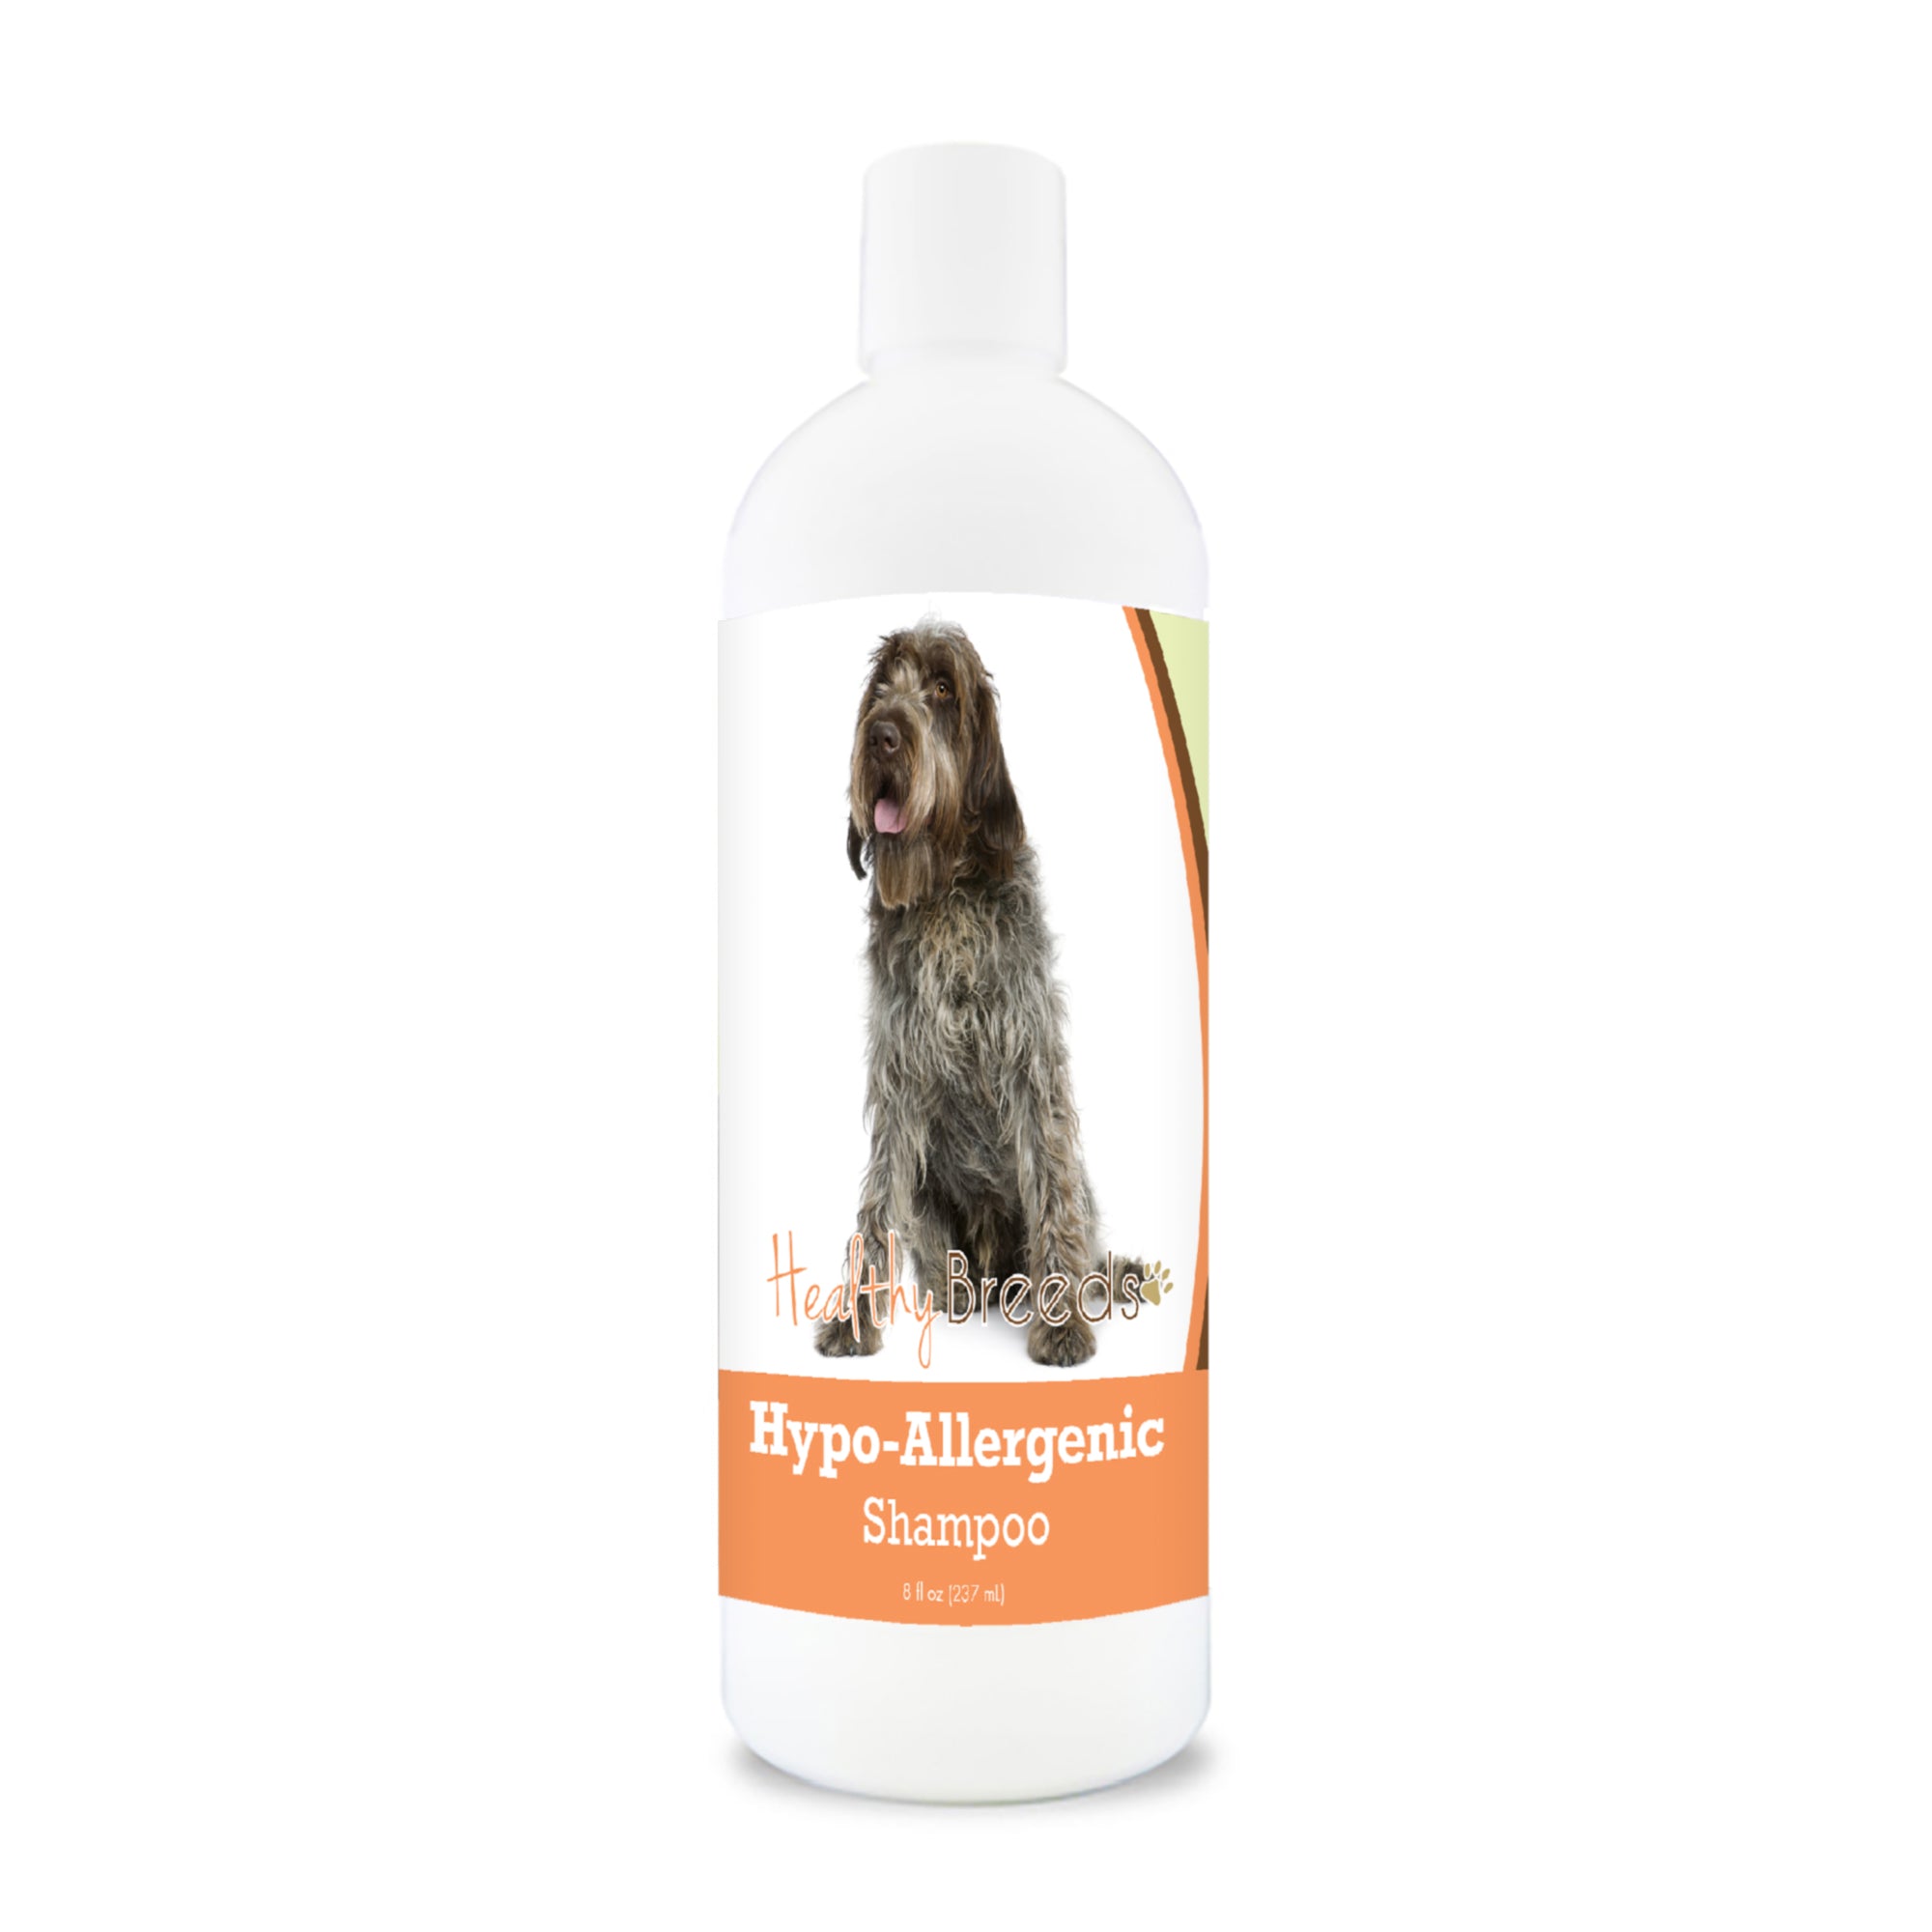 Wirehaired Pointing Griffon Hypo-Allergenic Shampoo 8 oz